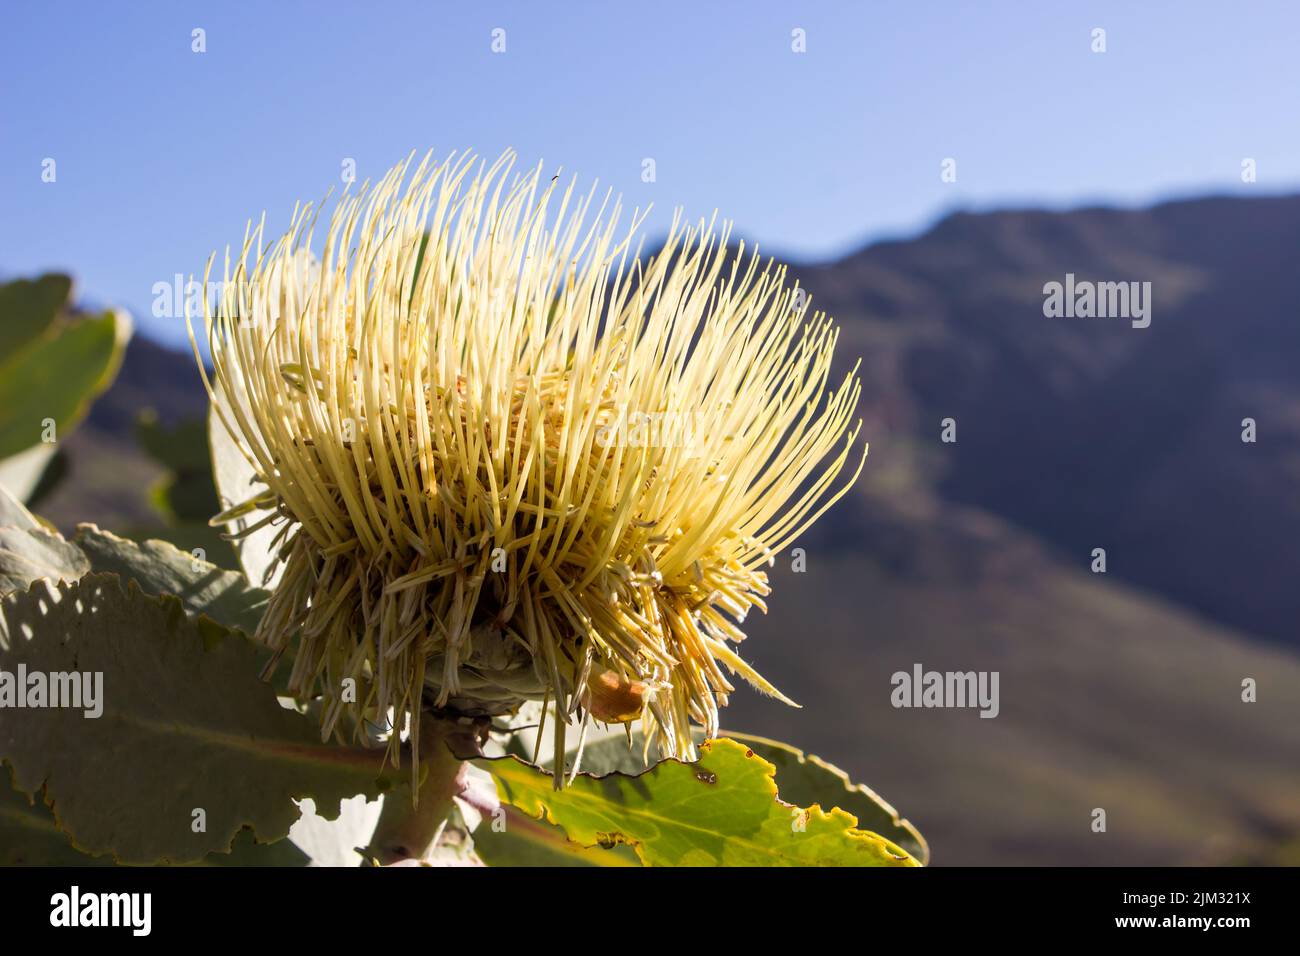 The Yellow, spiky flower of the Wagon tree protea, Protea Nitida, with the distant rugged cliffs of the Cederberg mountains in the background Stock Photo